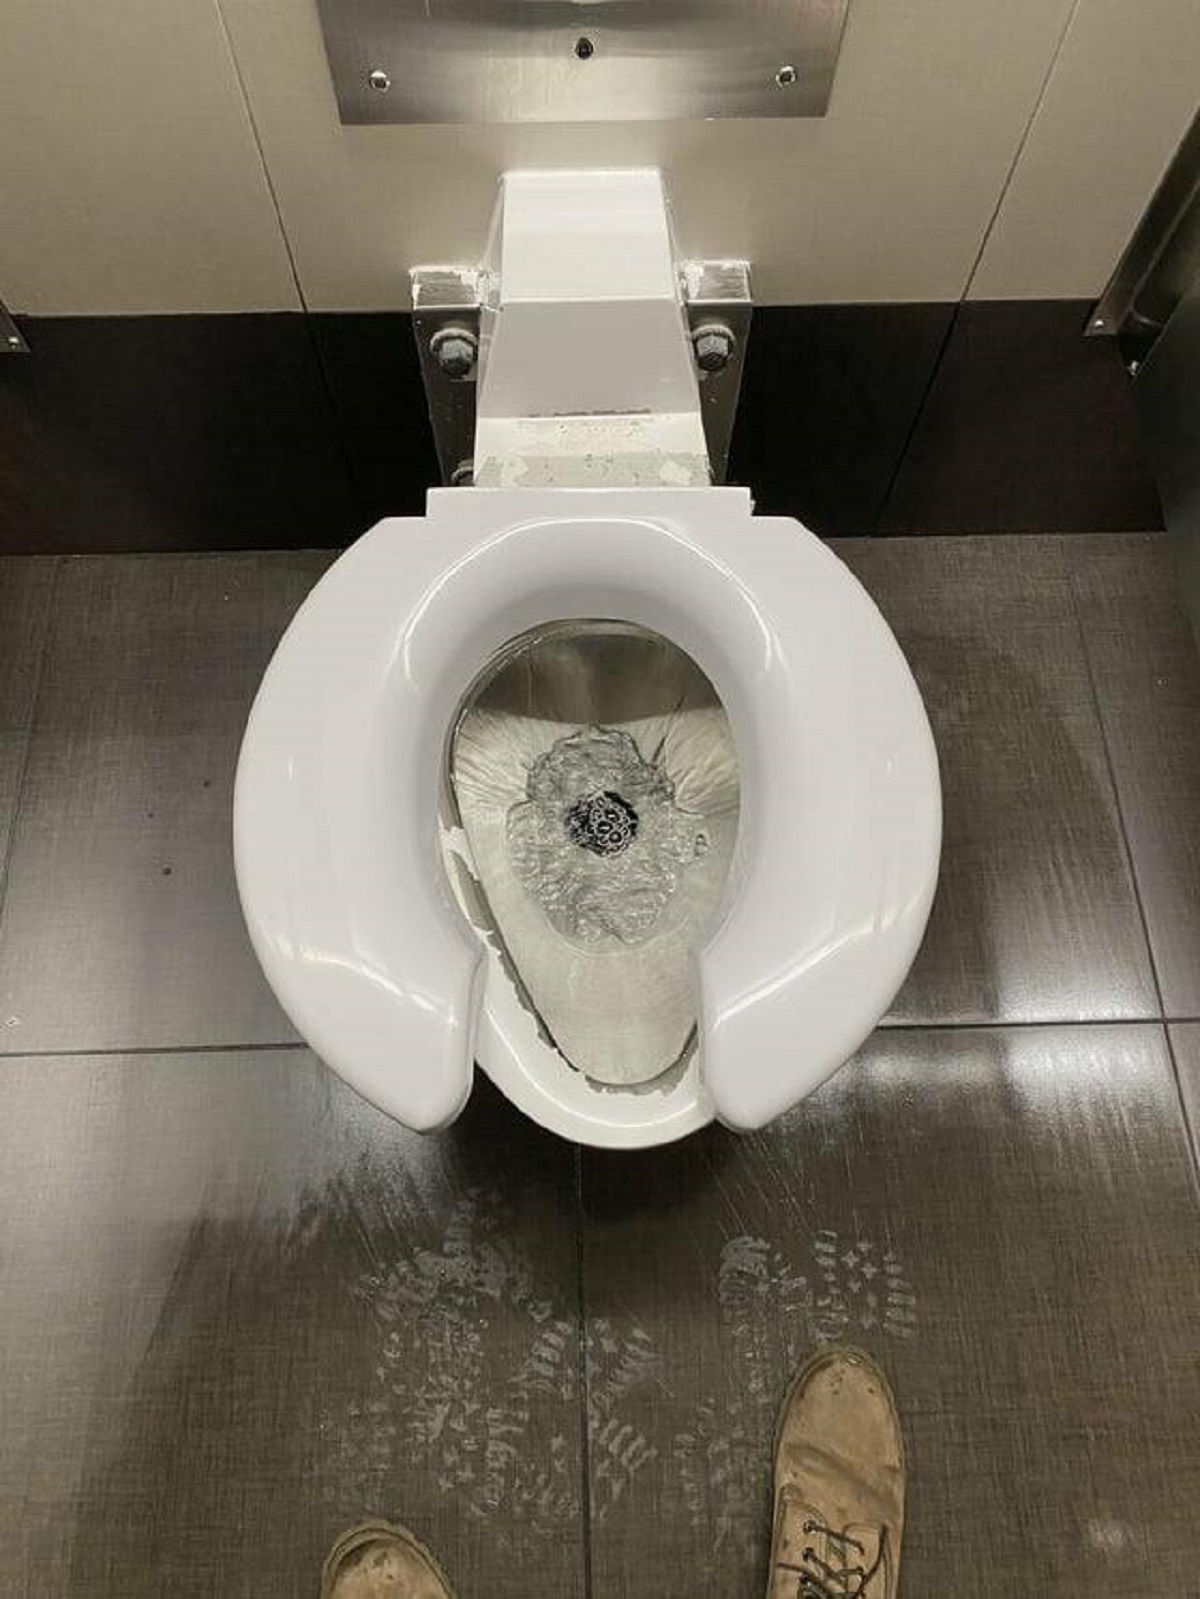 "XL toilet seat in Alabama airport"